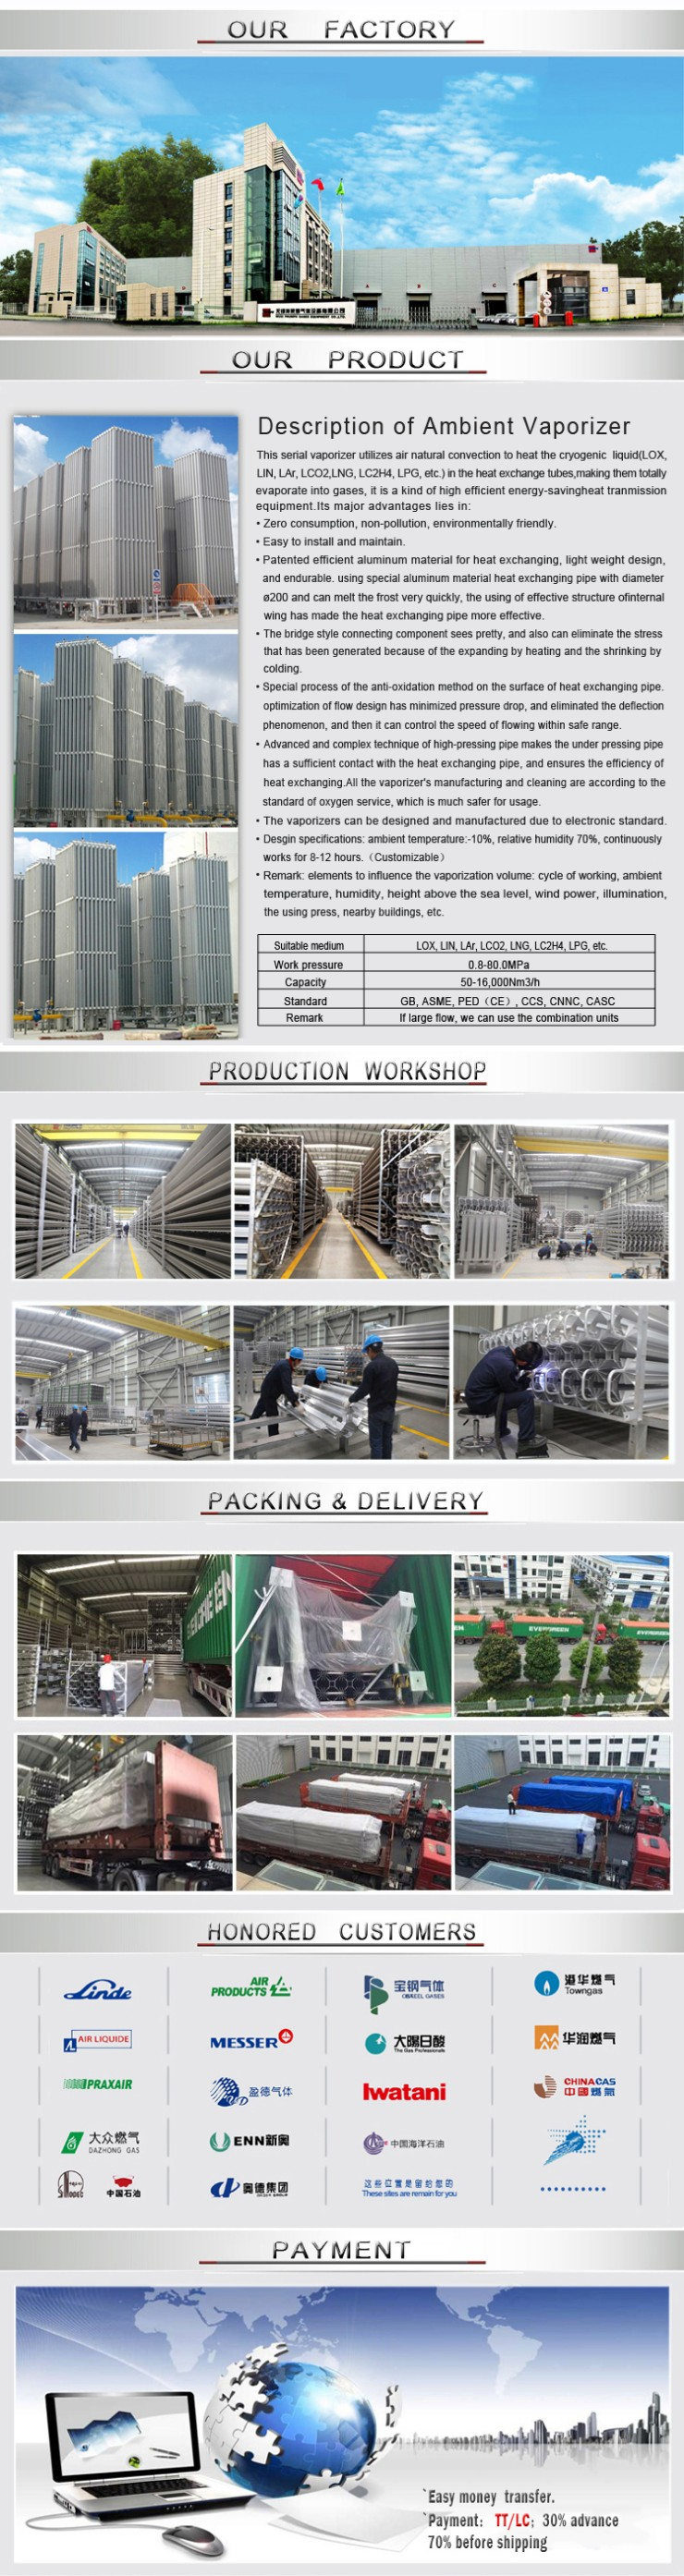 Lin/Lar Ambient Air Vaporizer/ LNG Gasification Station